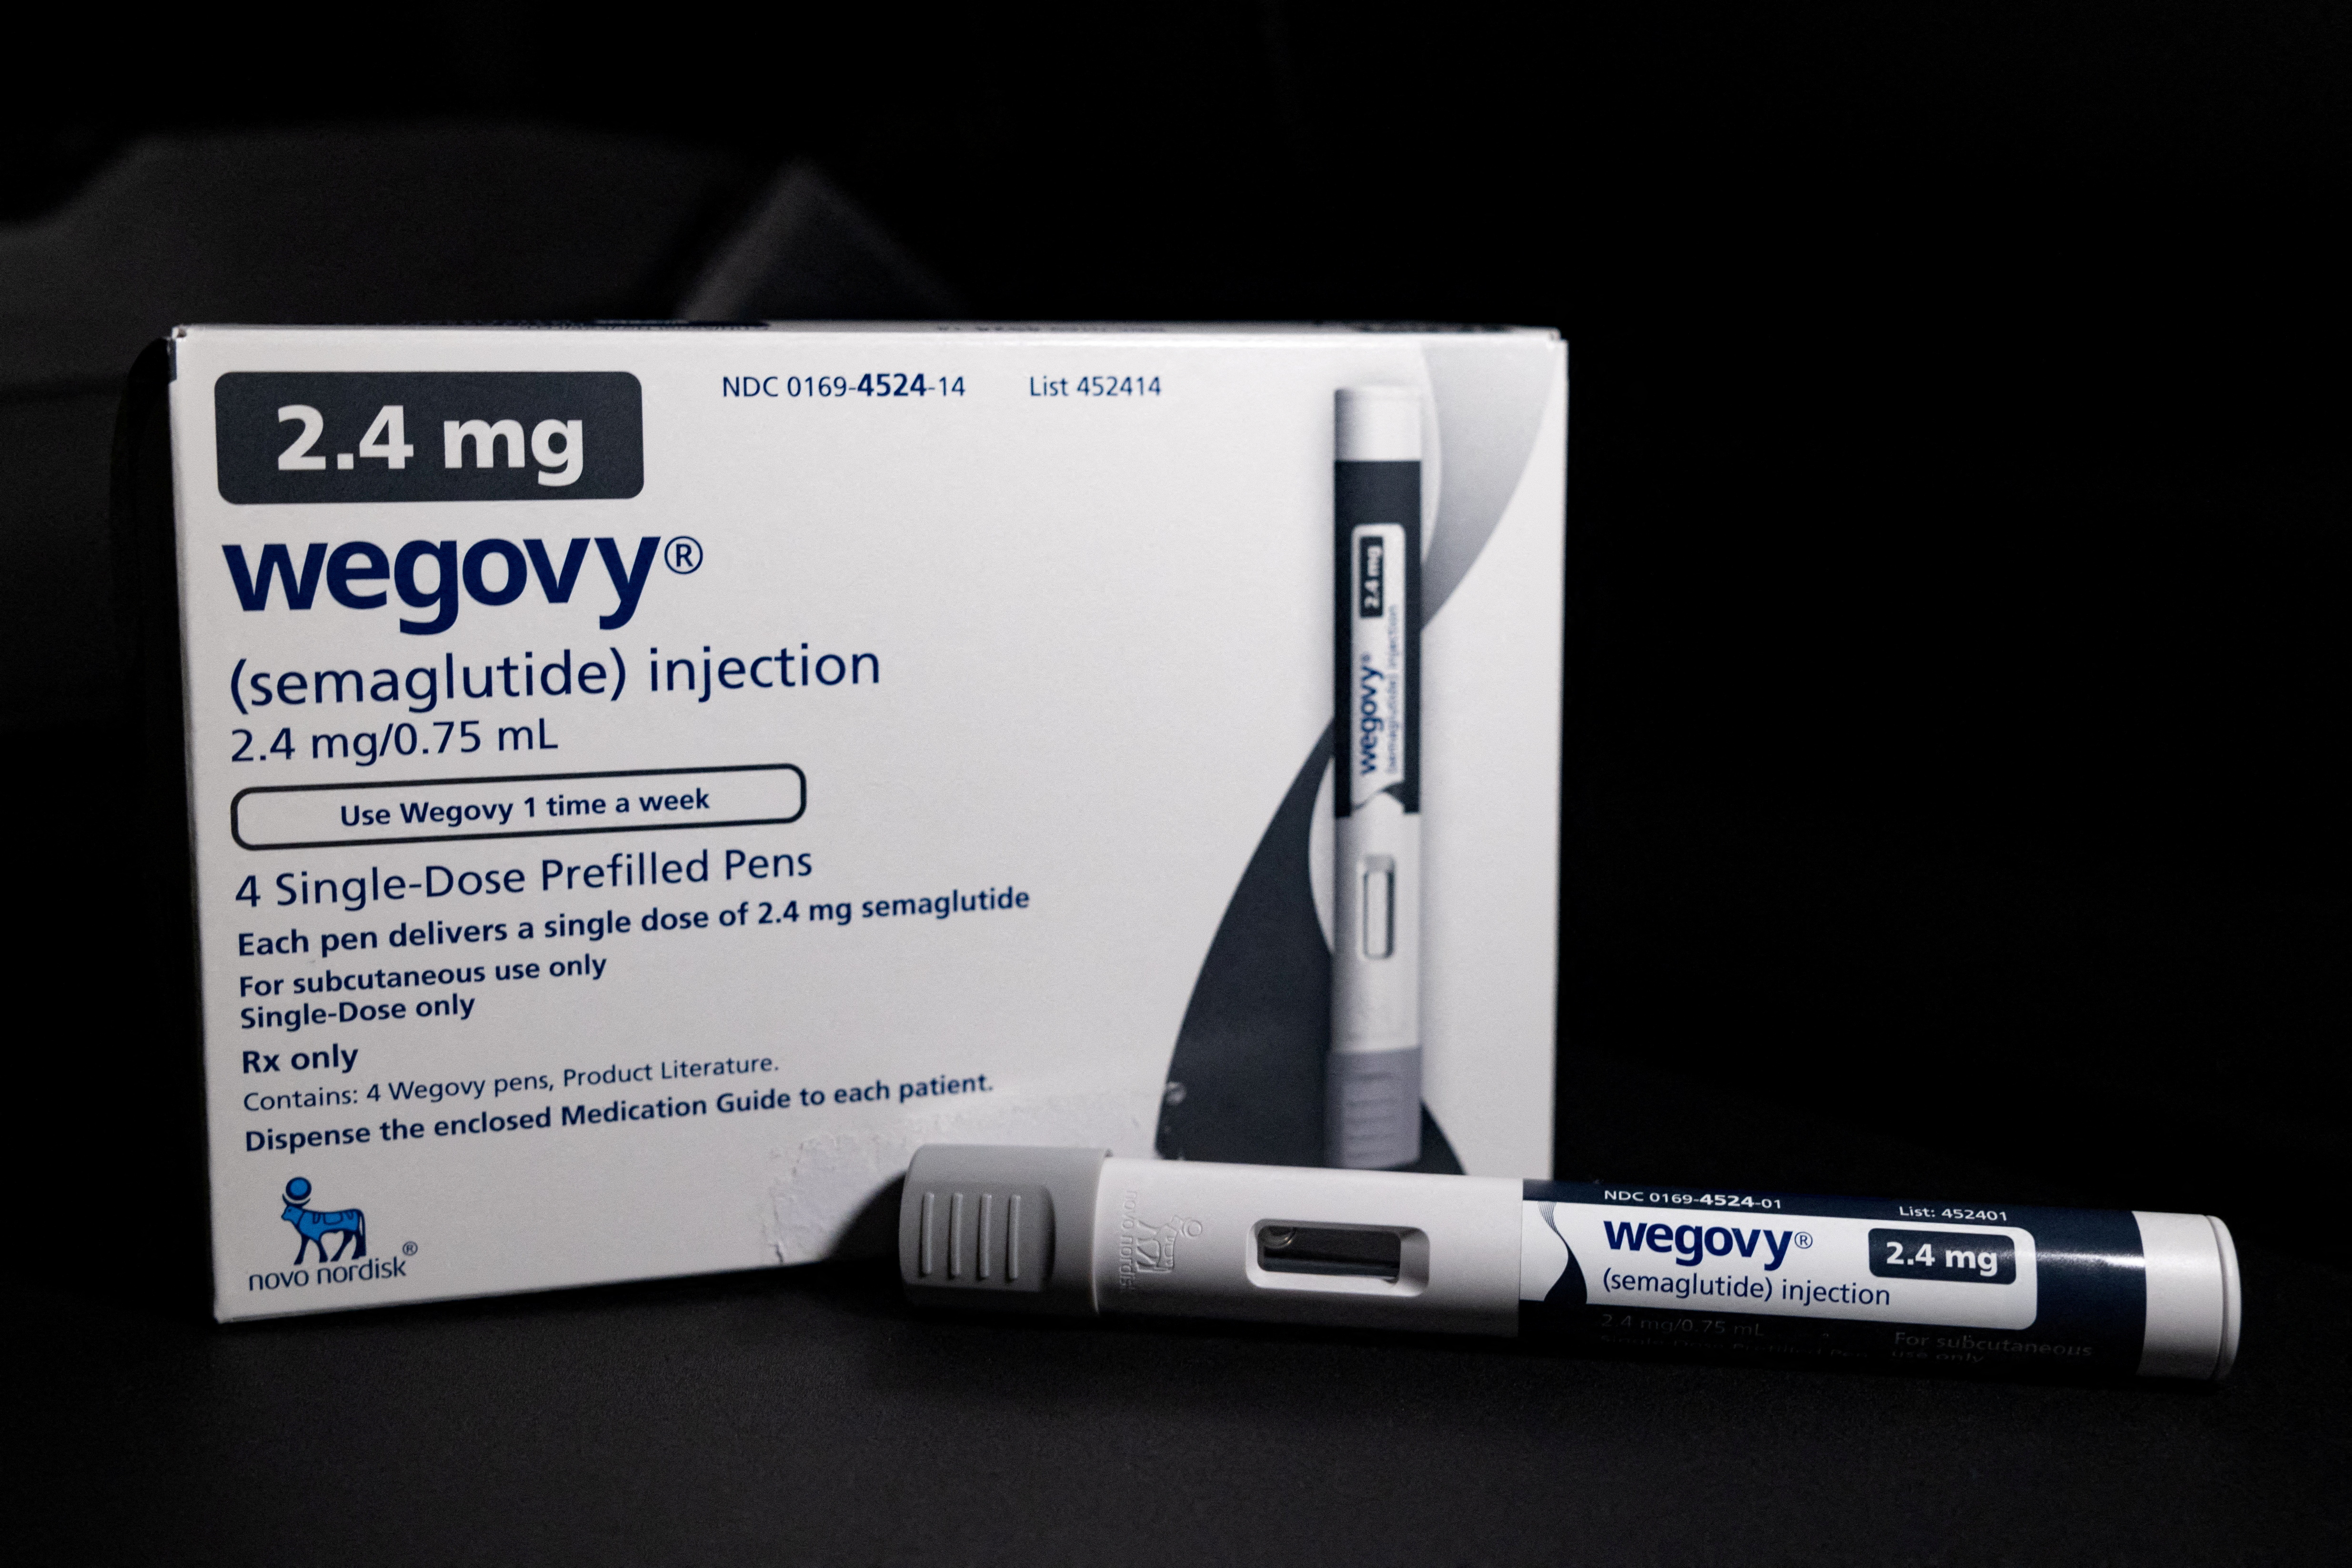 Generic Ozempic, Wegovy brands with semaglutide can be dangerous: FDA